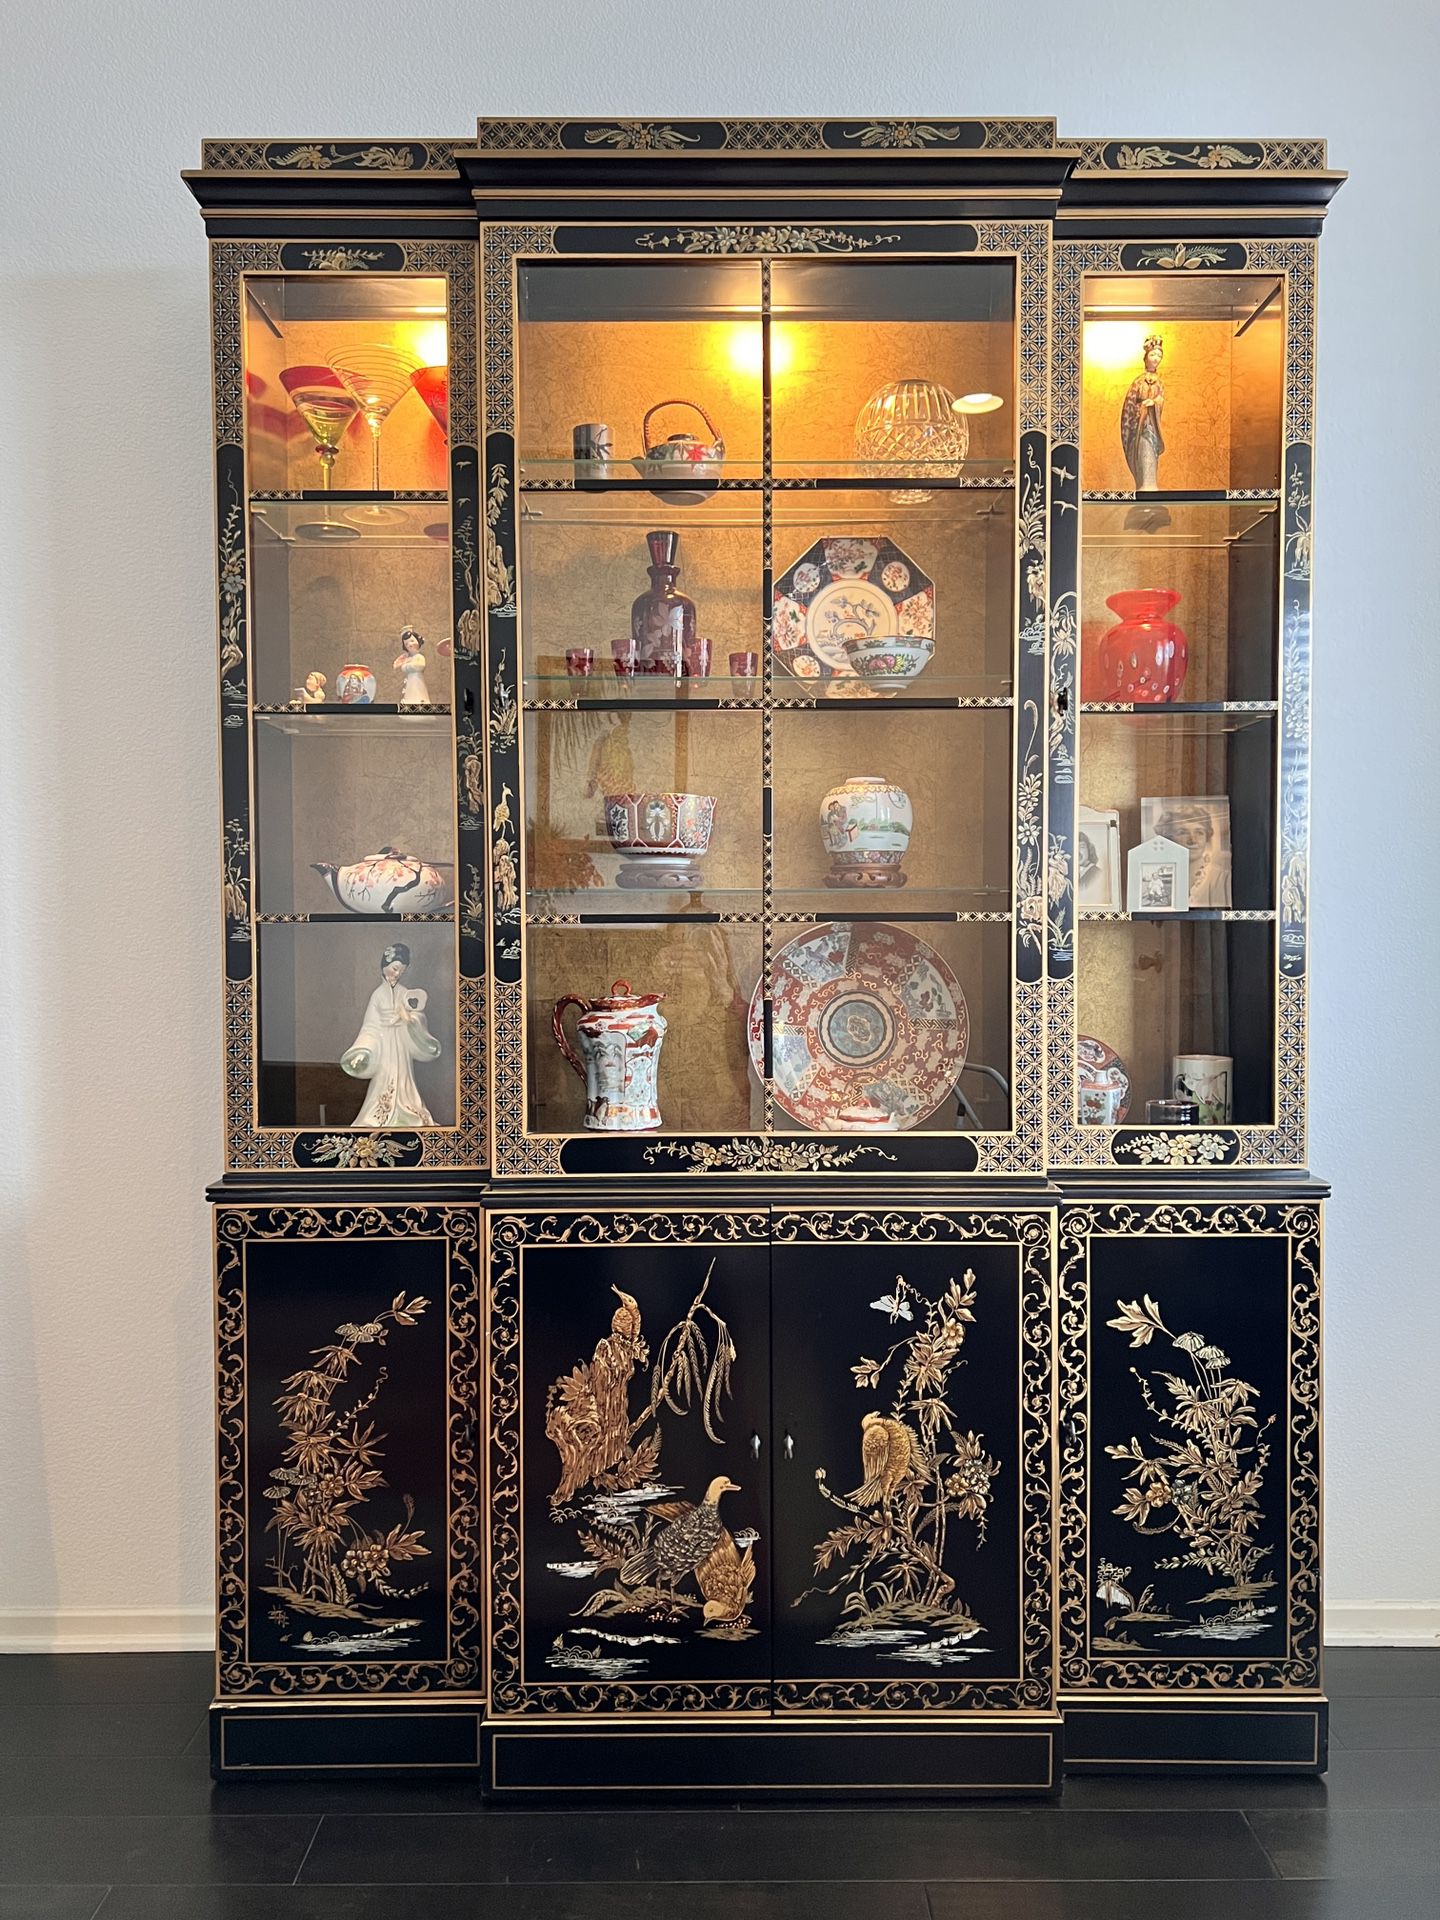 Vintage Chinese Curio Cabinet